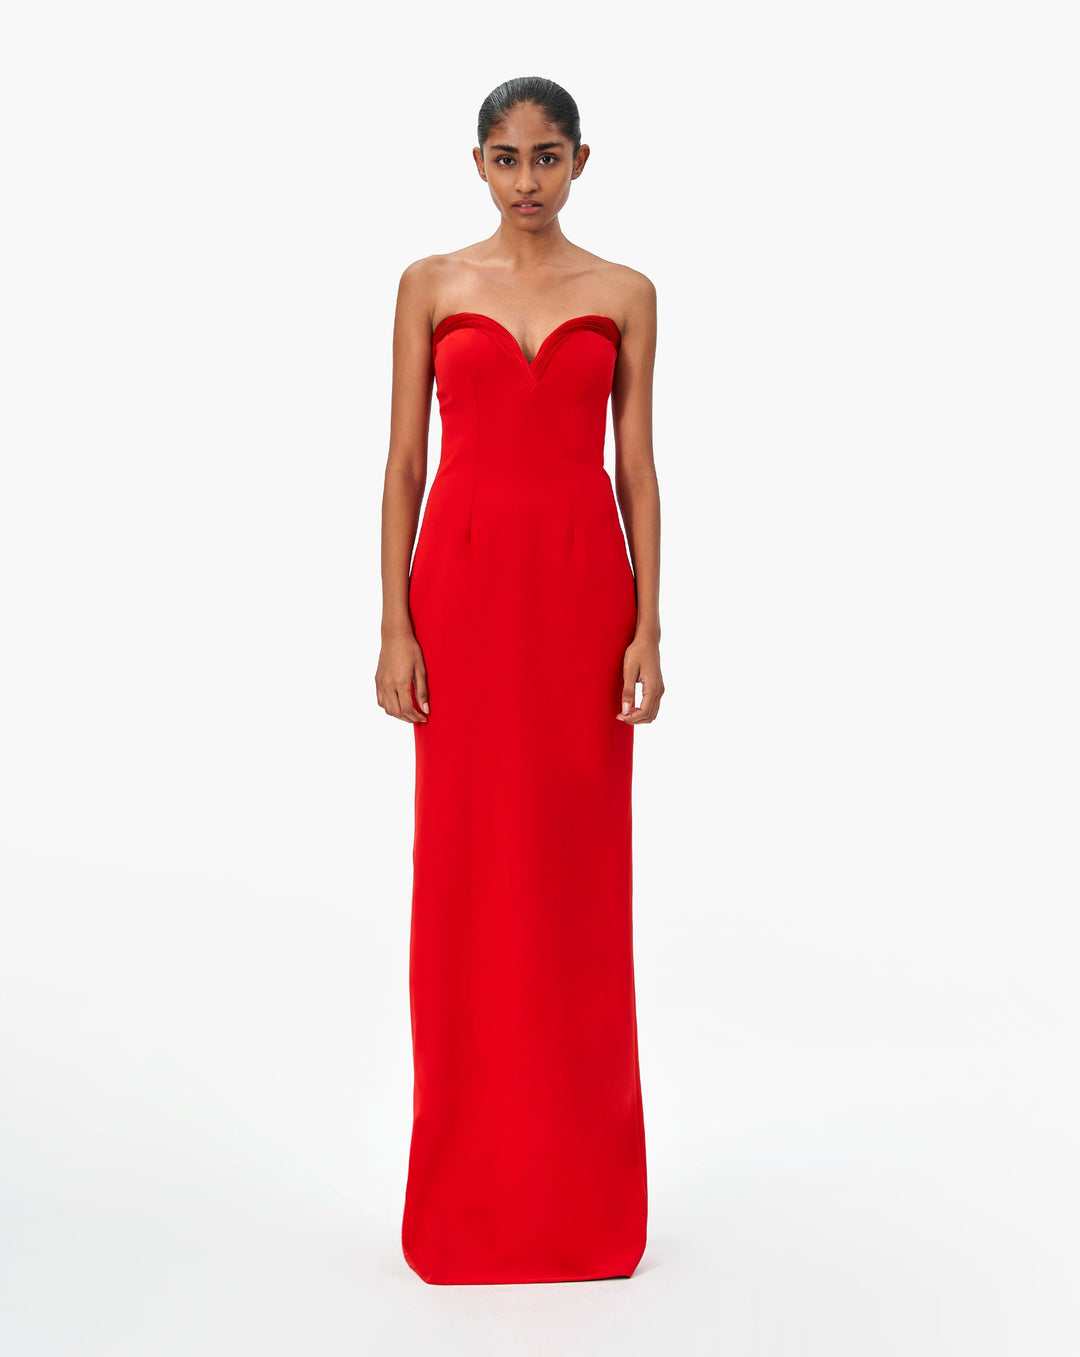 The Classic Sculpted Gown